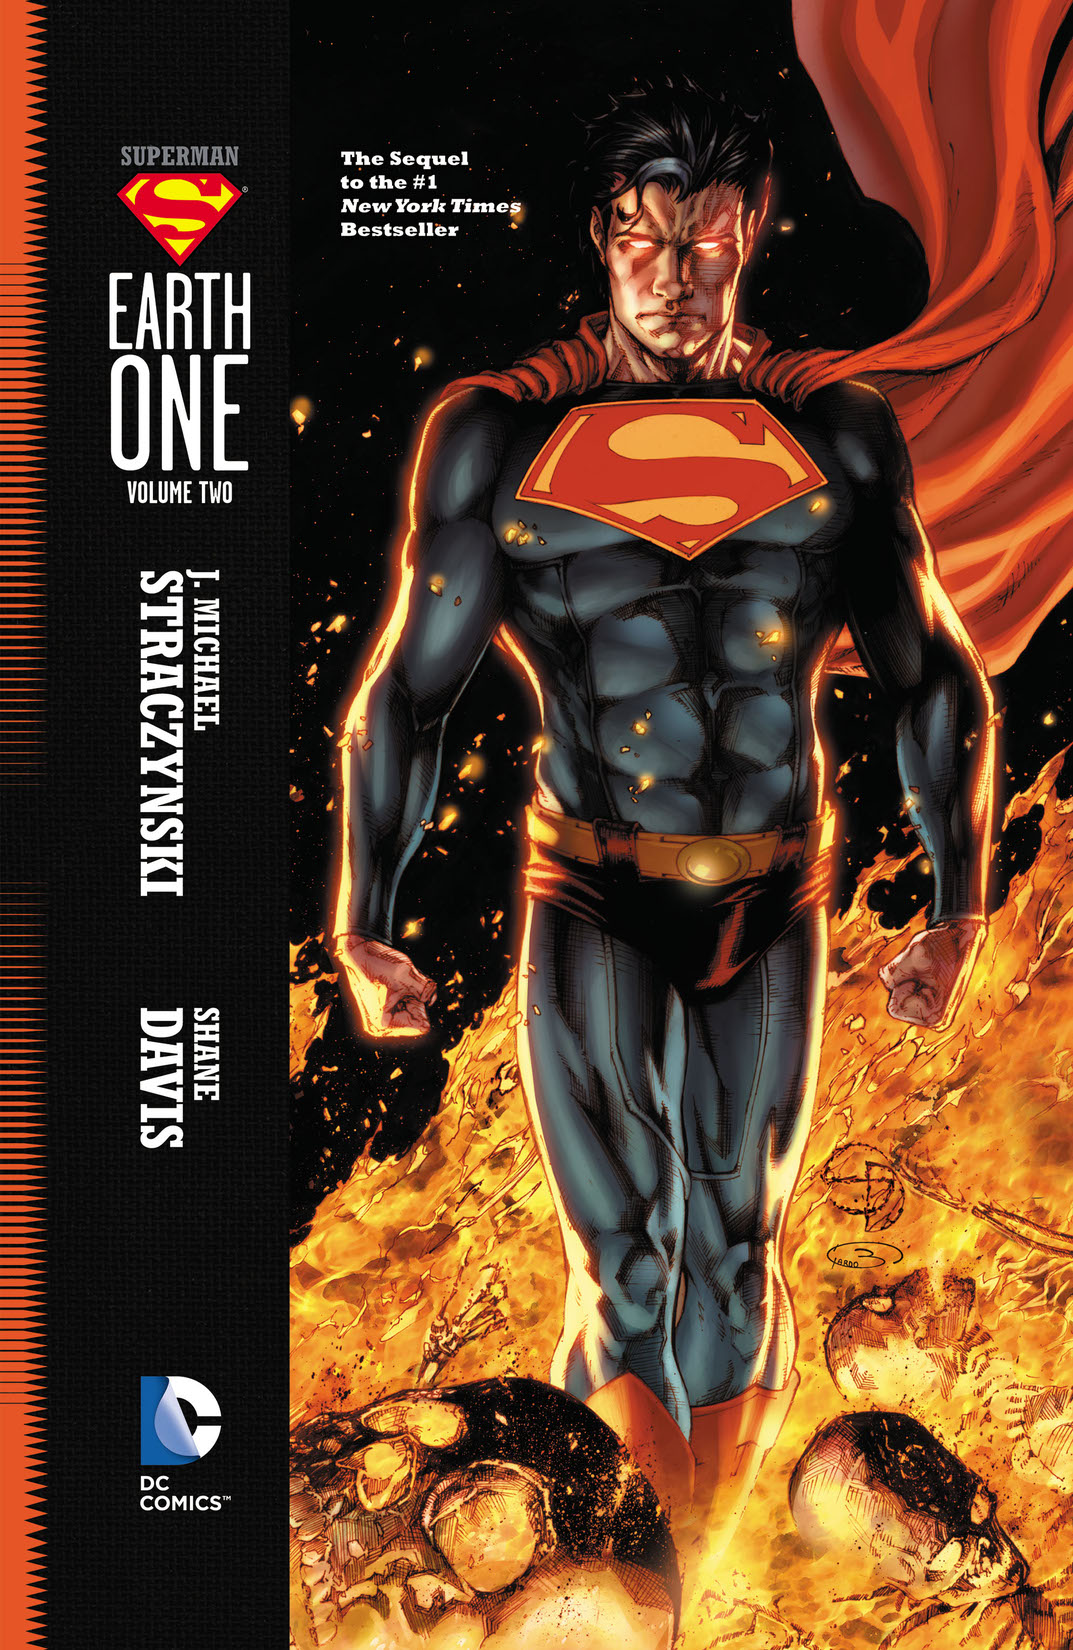 Superman: Earth One Vol. 2 preview images